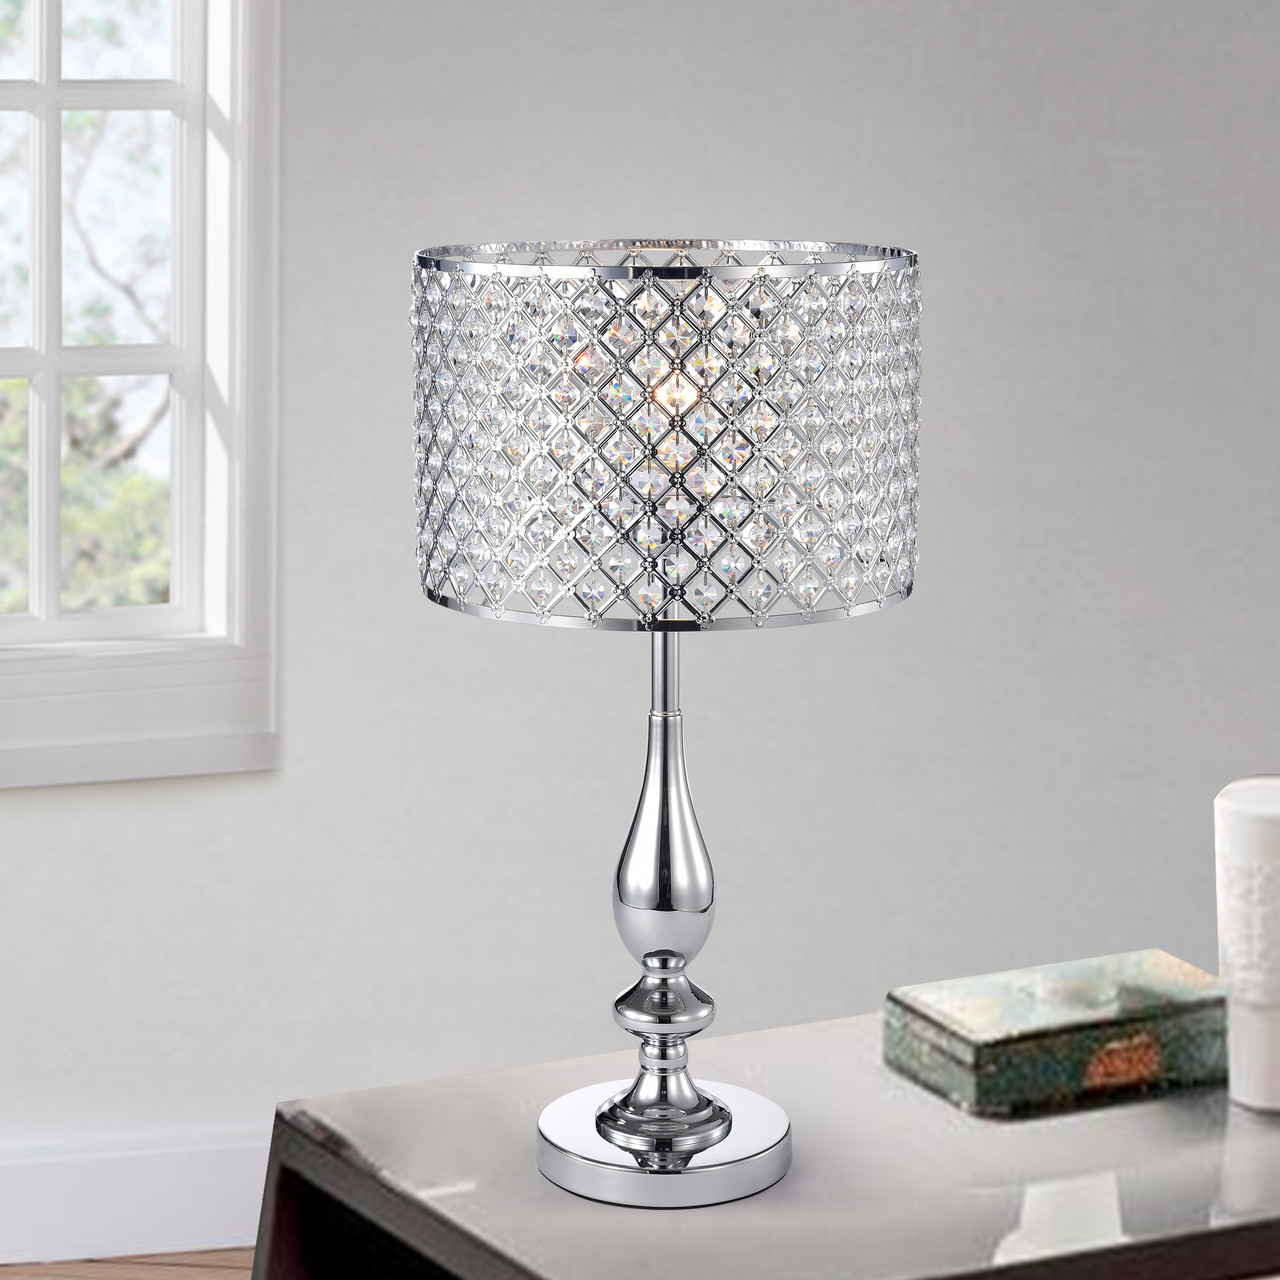 WAREHOUSE OF TIFFANY'S IMT81B/1CH Divina Crystal and Chrome Table Lamp